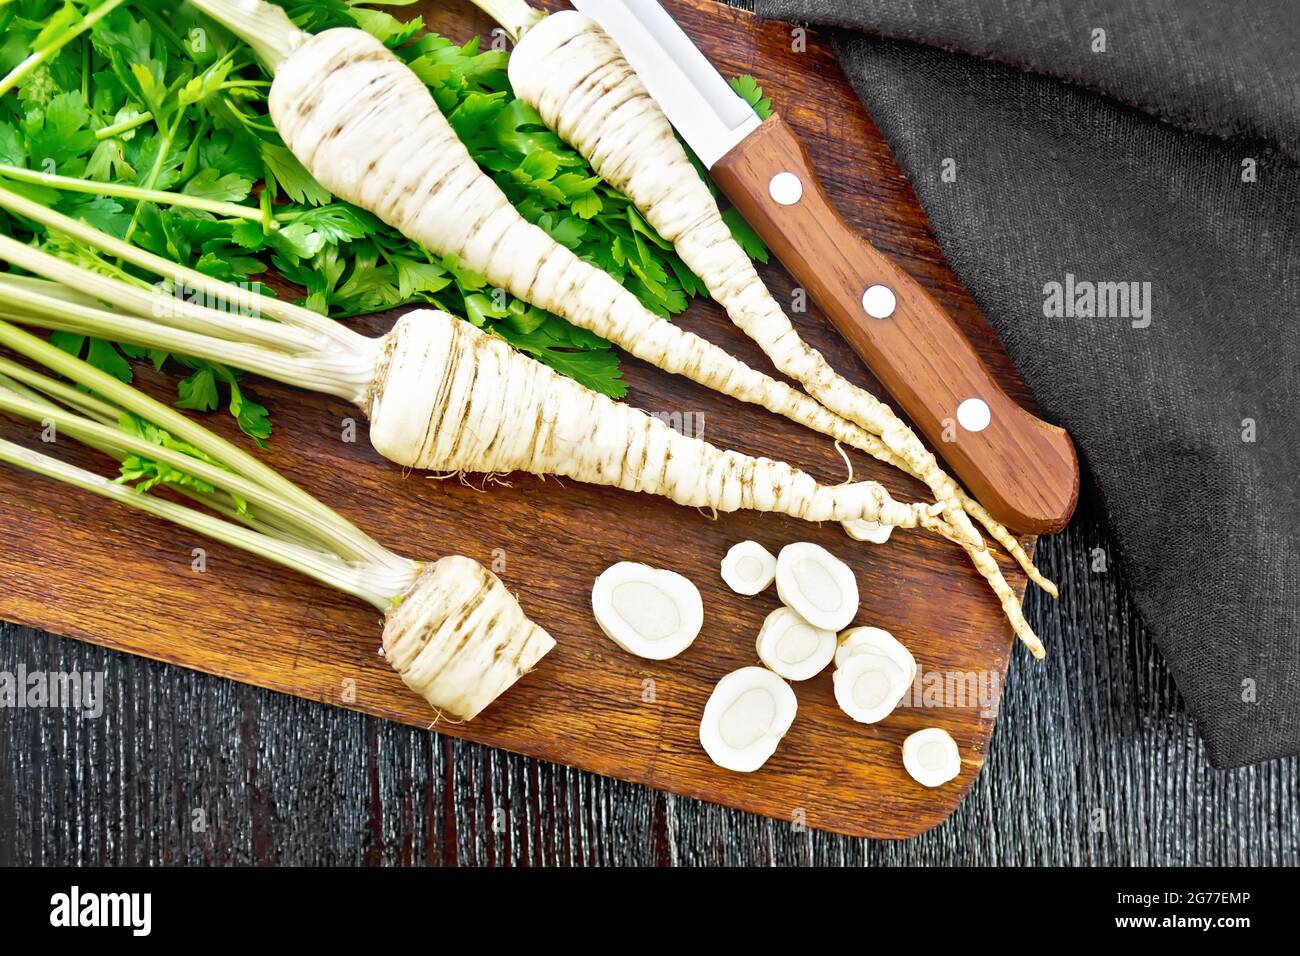 Parsley roots whole and chopped with green tops, knife, napkin on the background of a dark wooden board from above Stock Photo